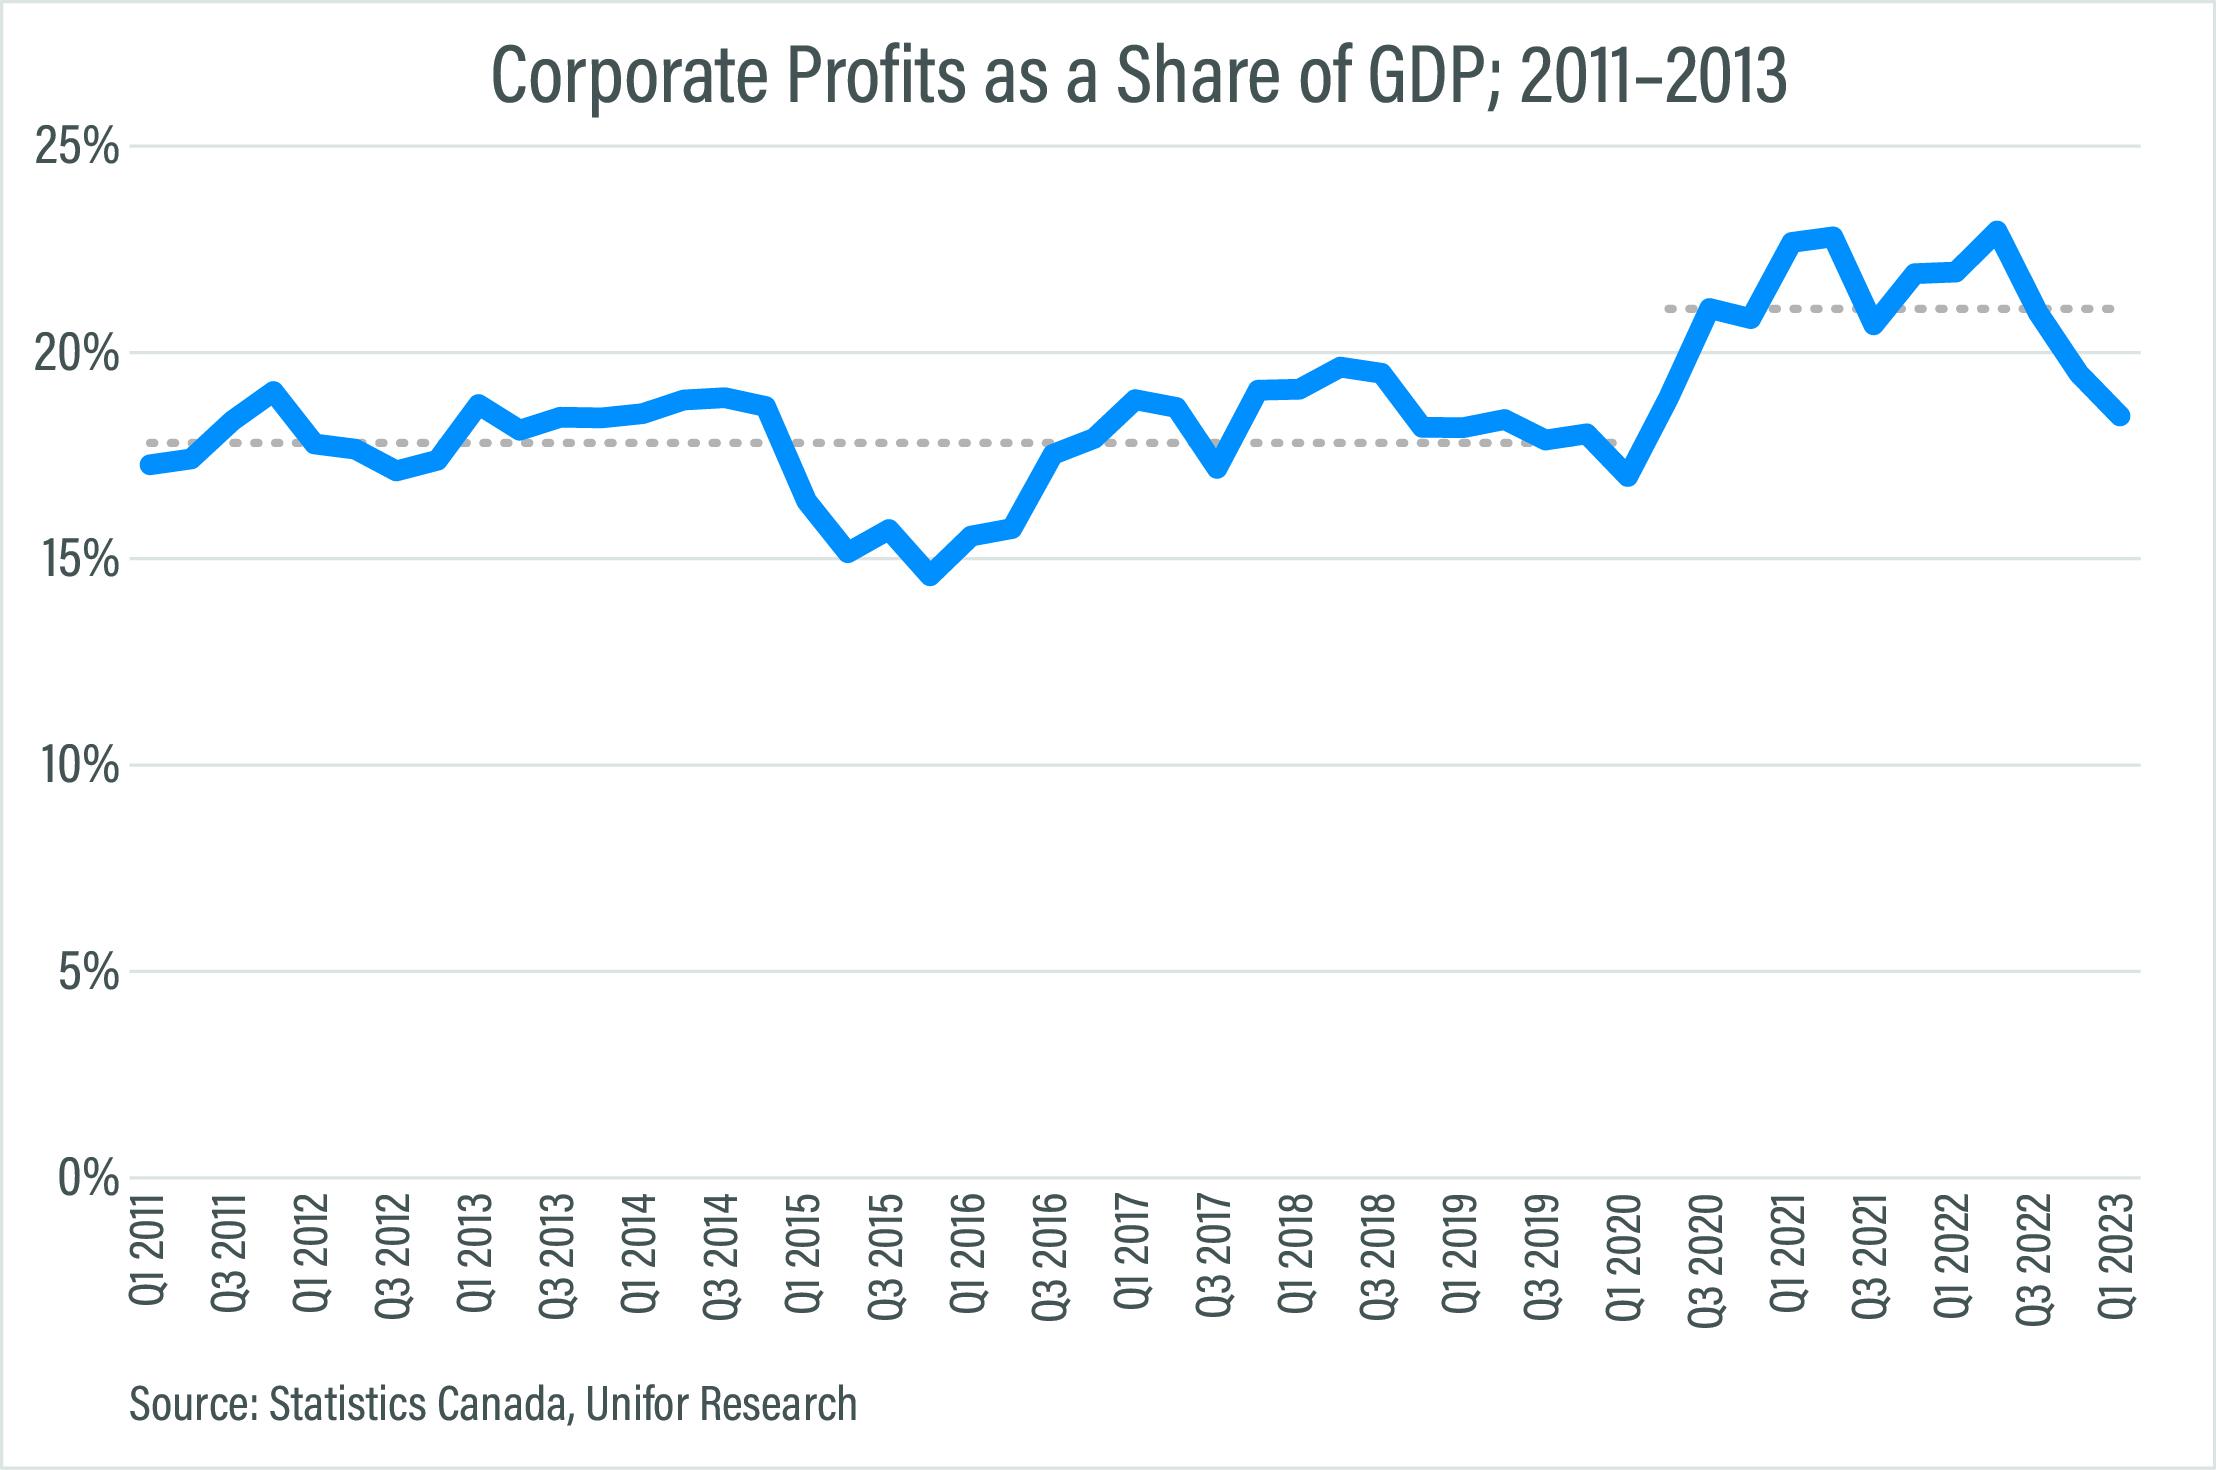 corprate profits as a share of GDP, 2011-2013 line graph